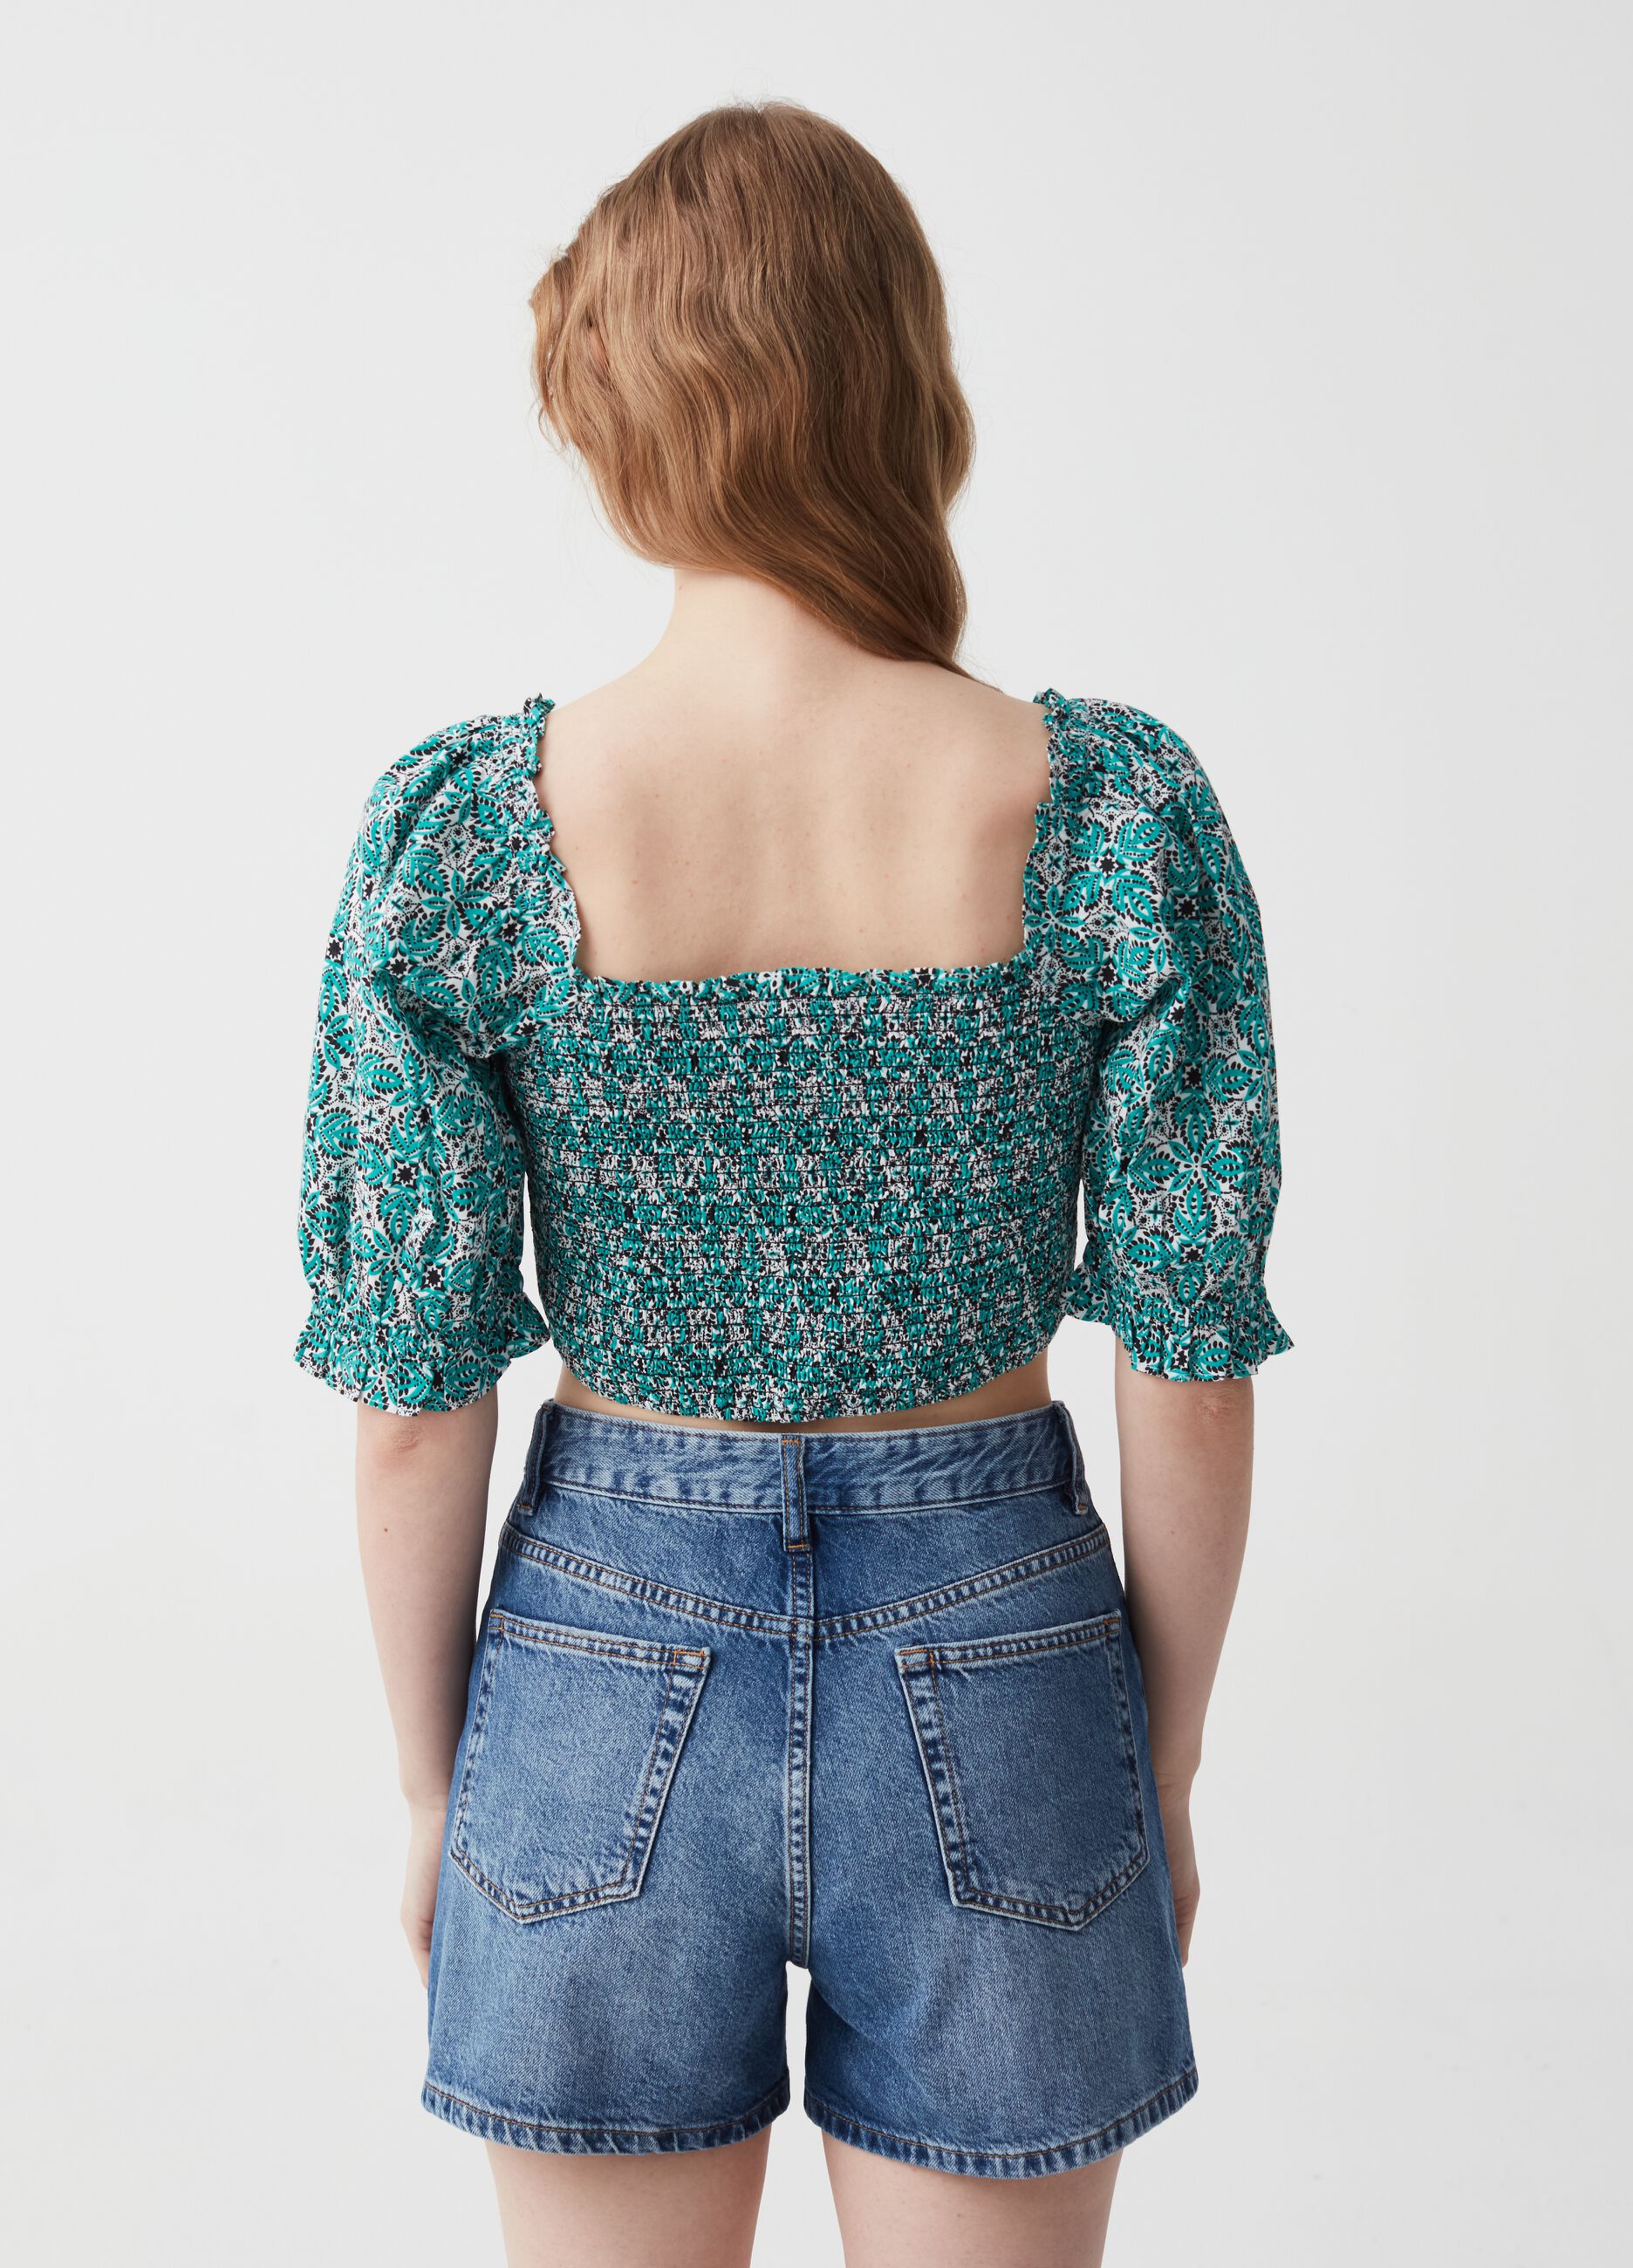 Crop top with smock stitch and paisley print